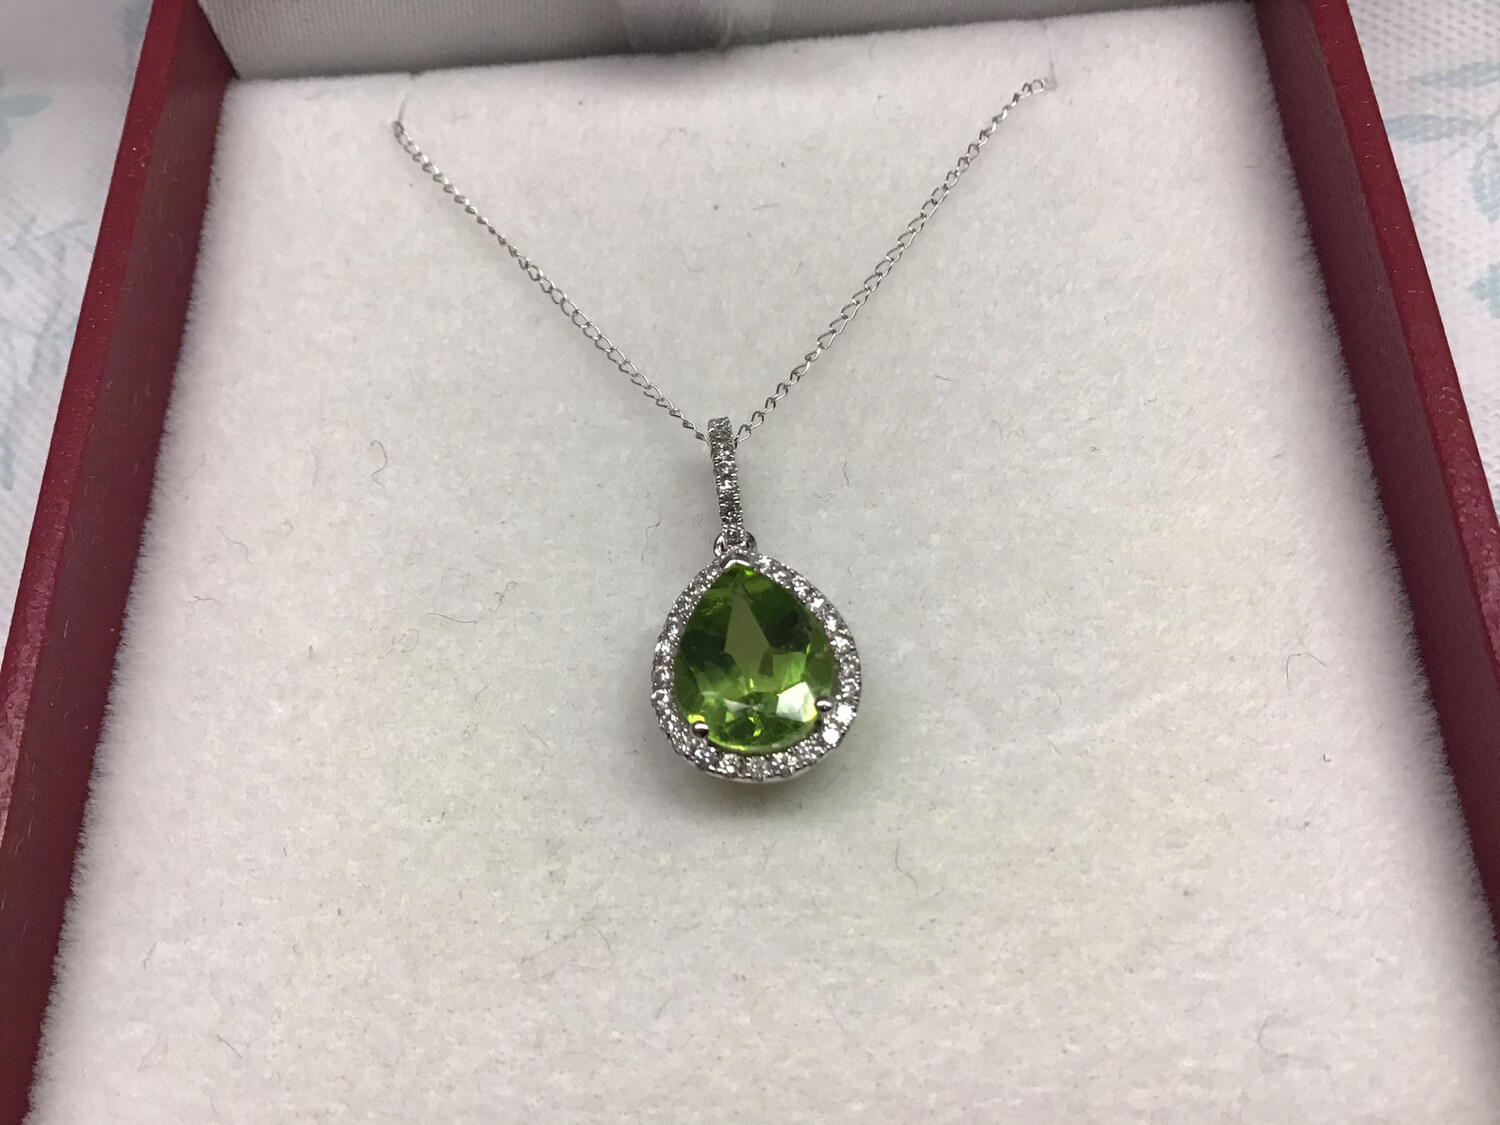 PERIDOT GREEN PEAR SHAPED NECKLACE CIRCLED WITH DIAMONDS SET IN A 14 KT.,